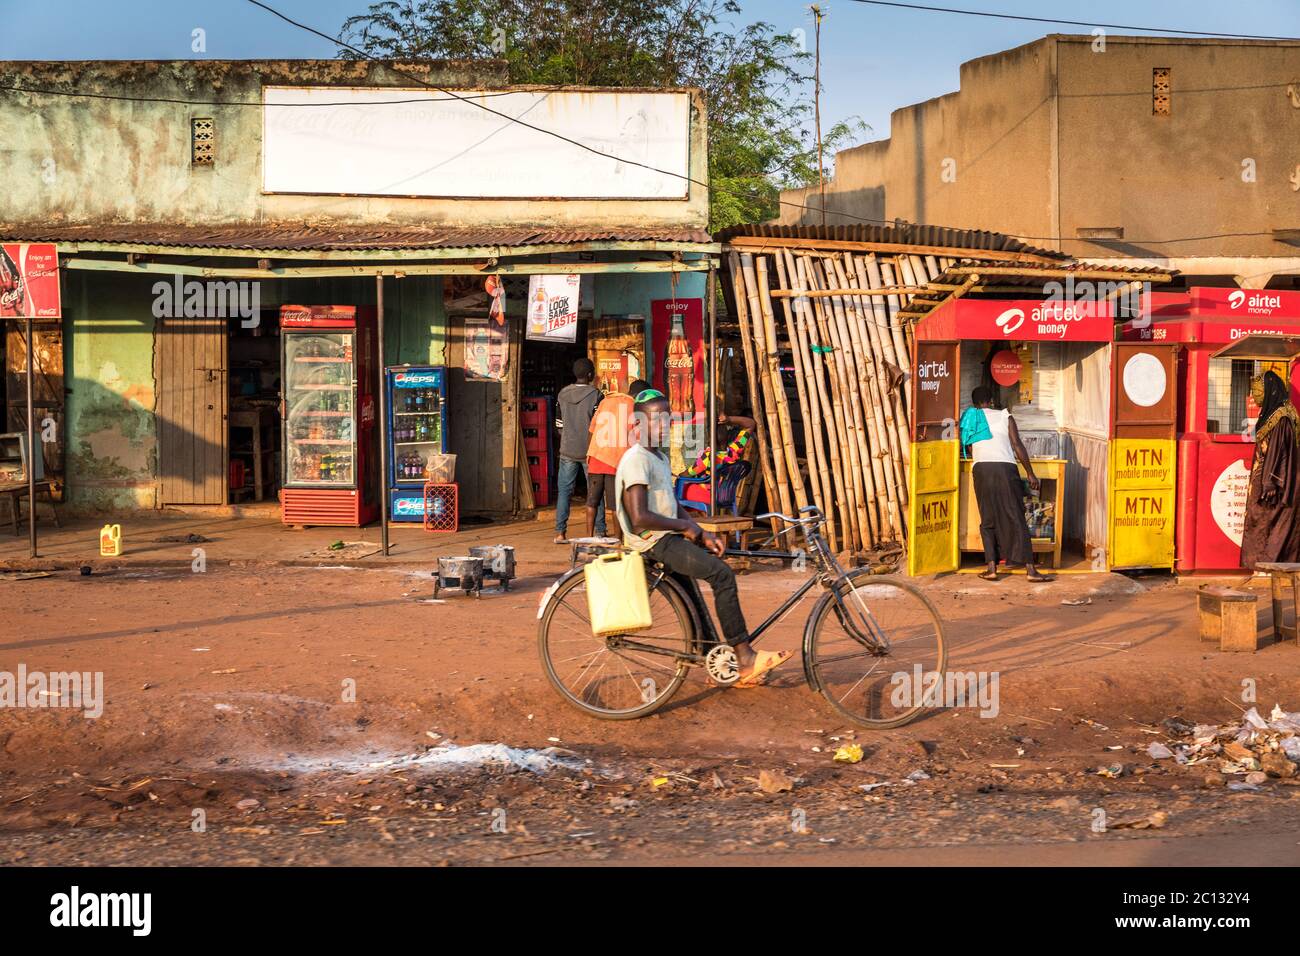 Roadside shops in rural Ugandan village with children in the street and a red dirt road, Uganda, Africa Stock Photo